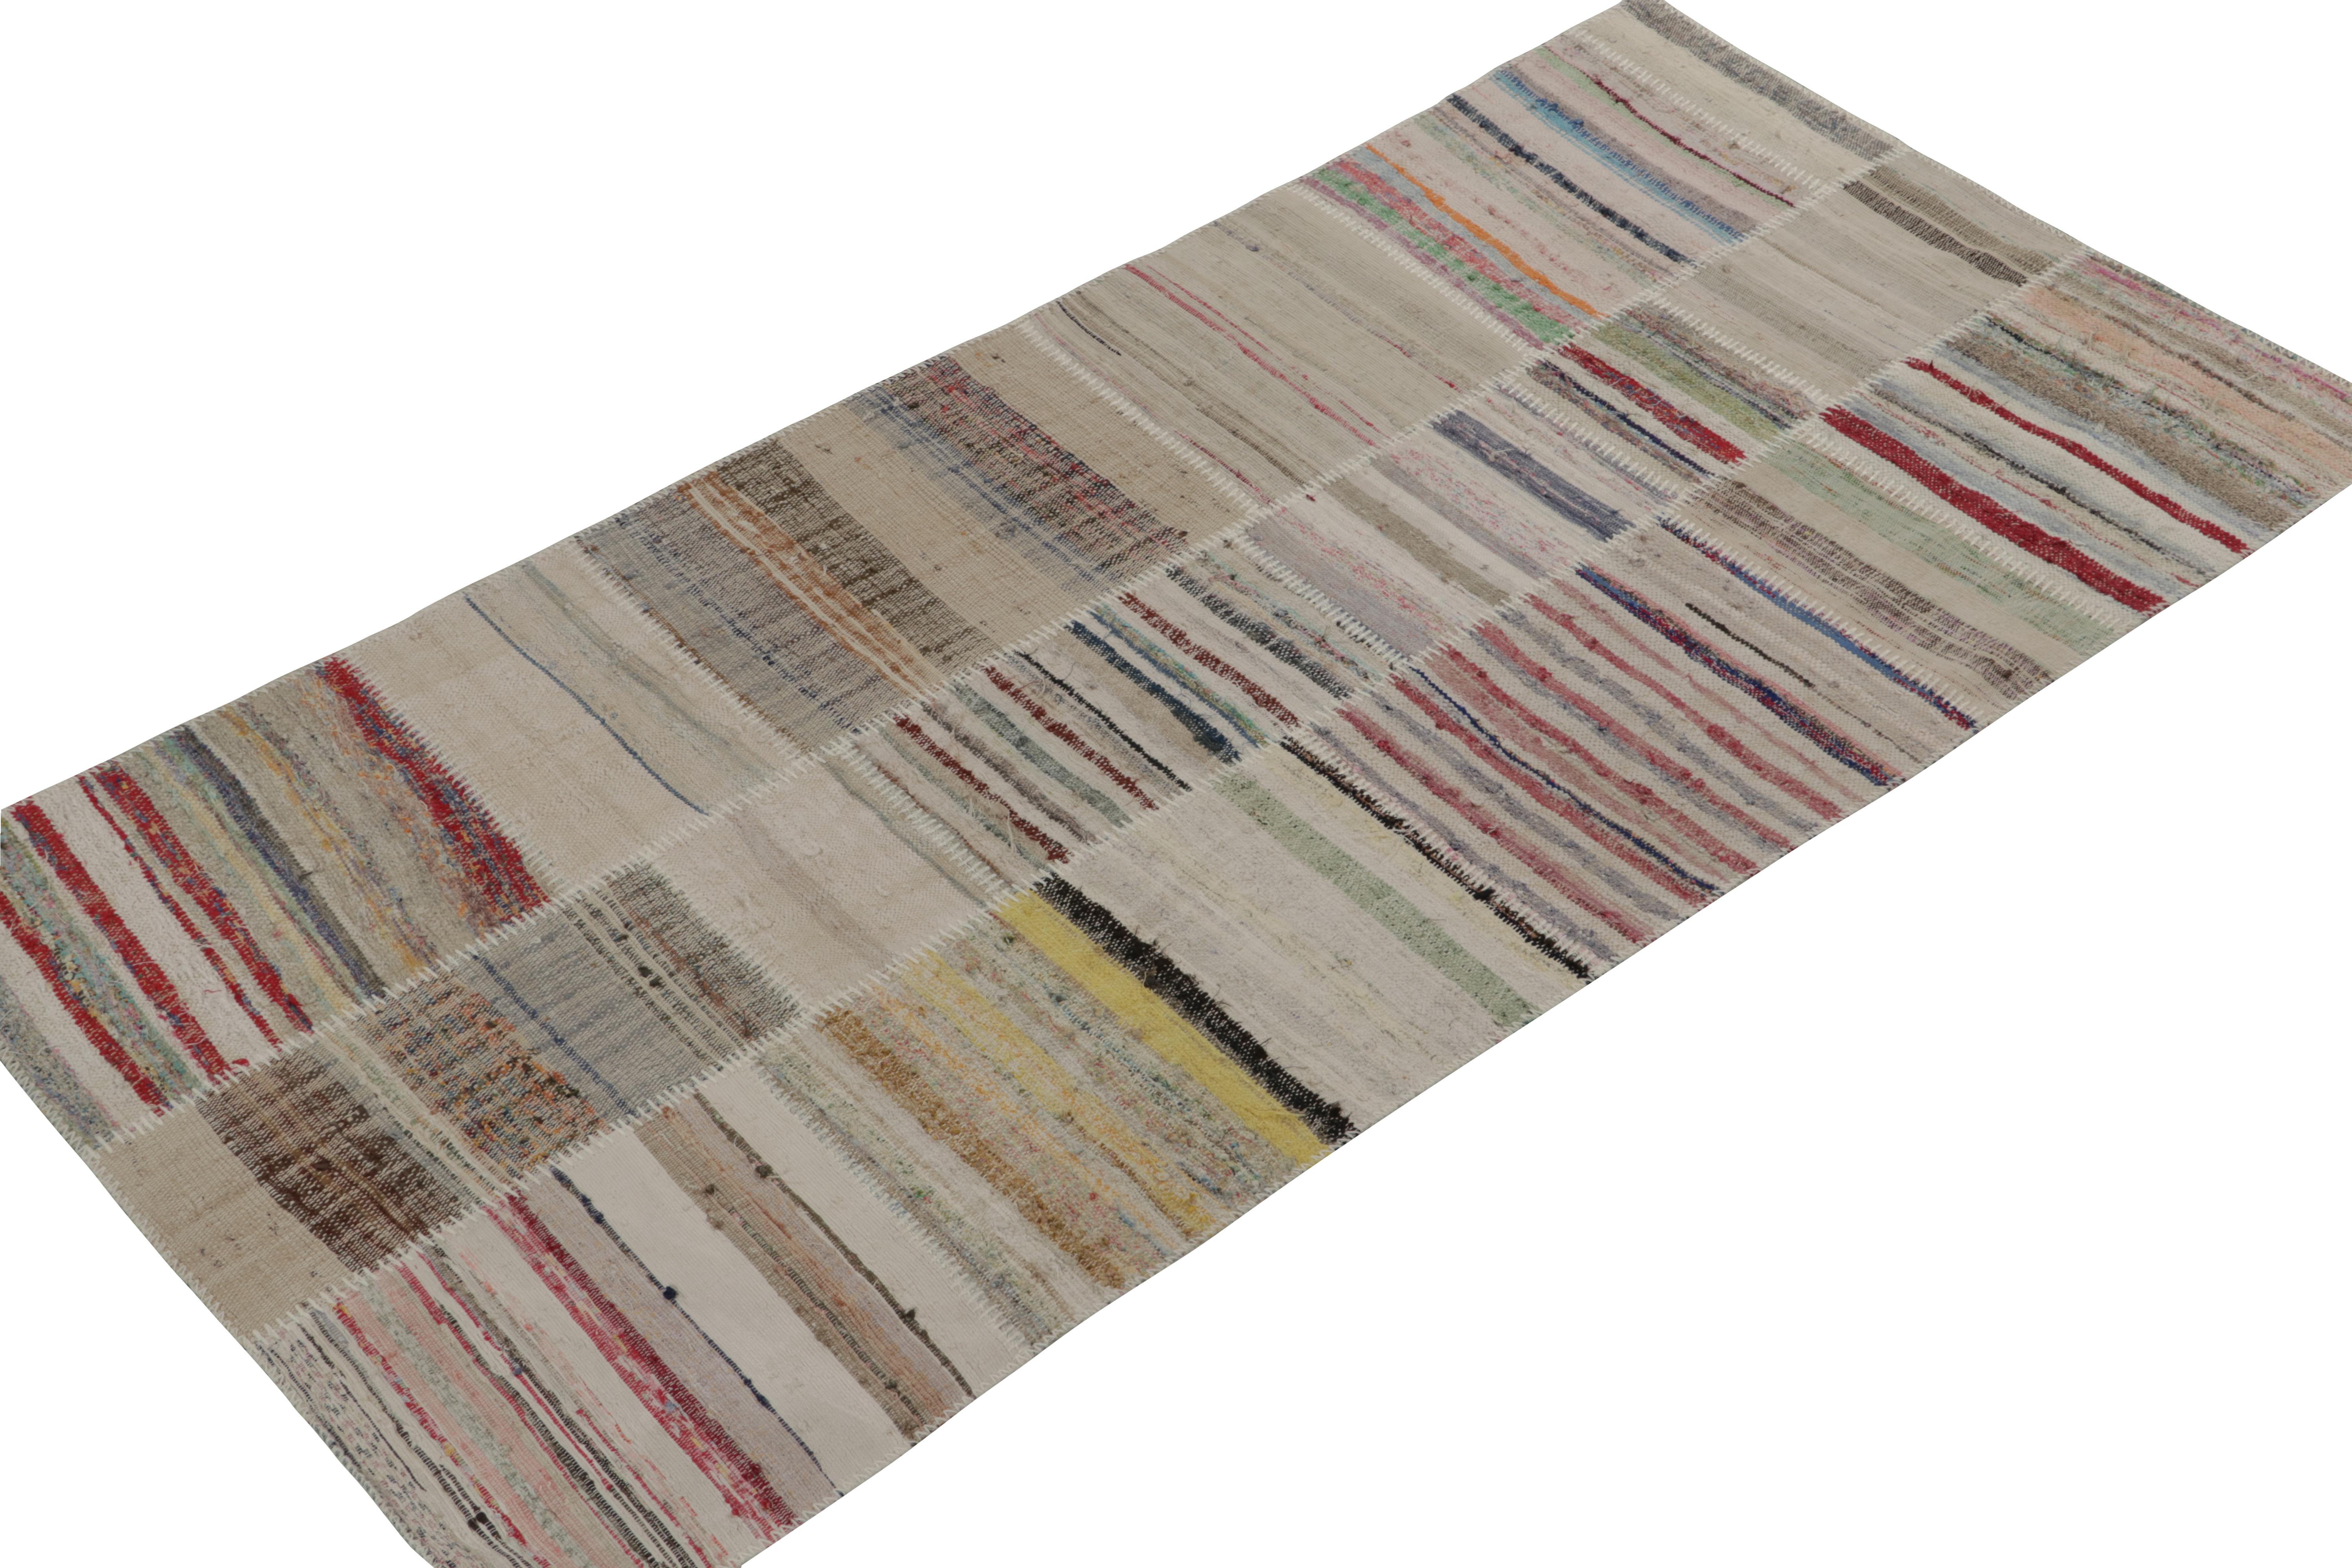 Handwoven in wool, Rug & Kilim presents a 4x8 contemporary rug from their innovative new patchwork kilim collection. 

On the Design: 

This flat weave technique repurposes vintage yarns in polychromatic stripes and striae, achieving a playful look